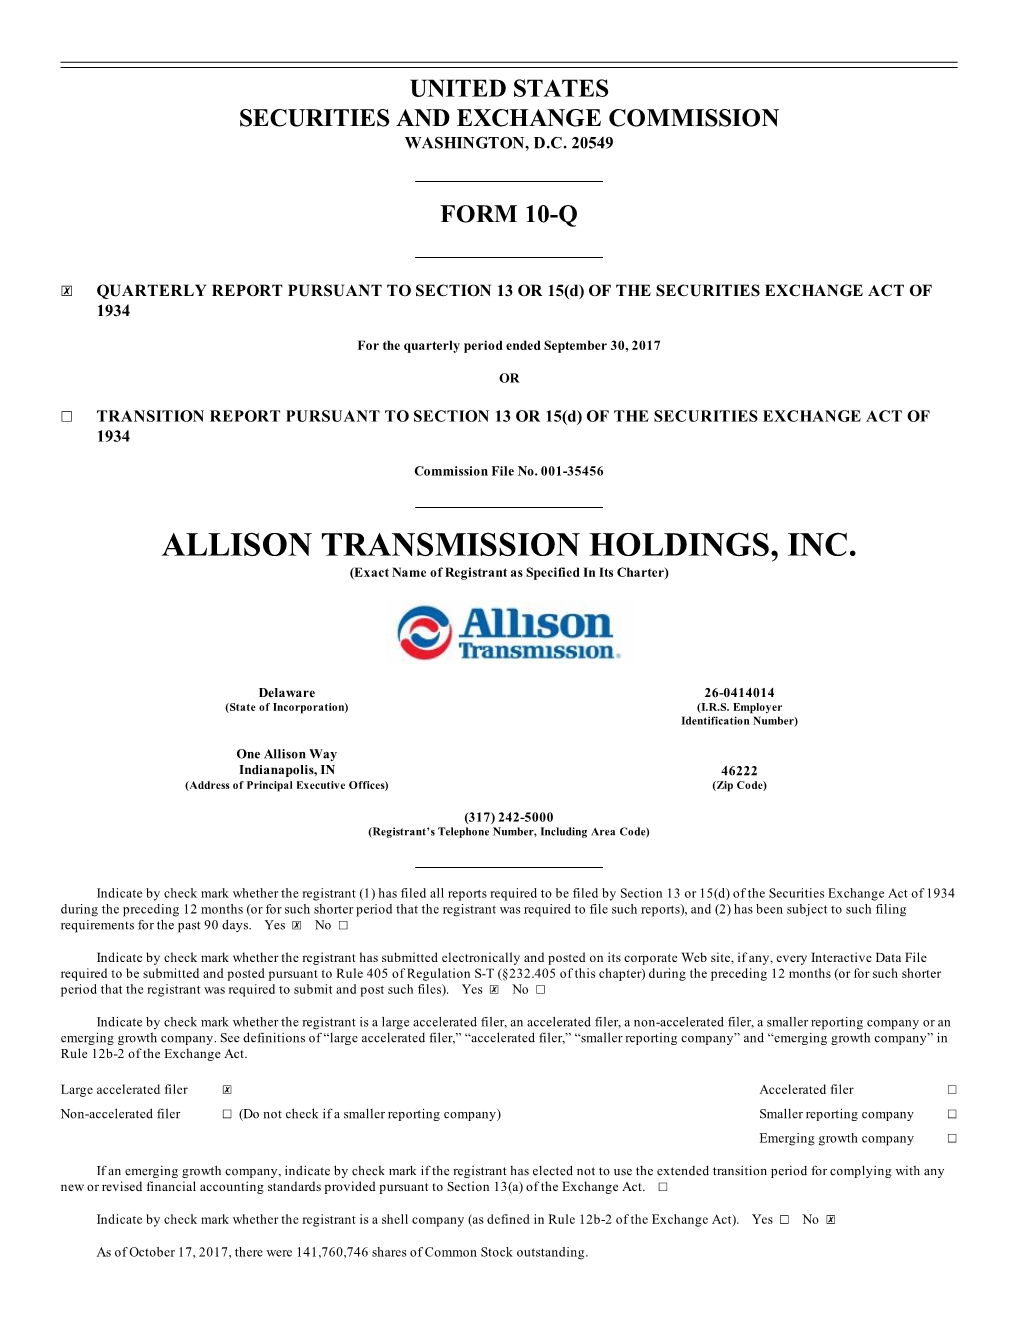 ALLISON TRANSMISSION HOLDINGS, INC. (Exact Name of Registrant As Specified in Its Charter)